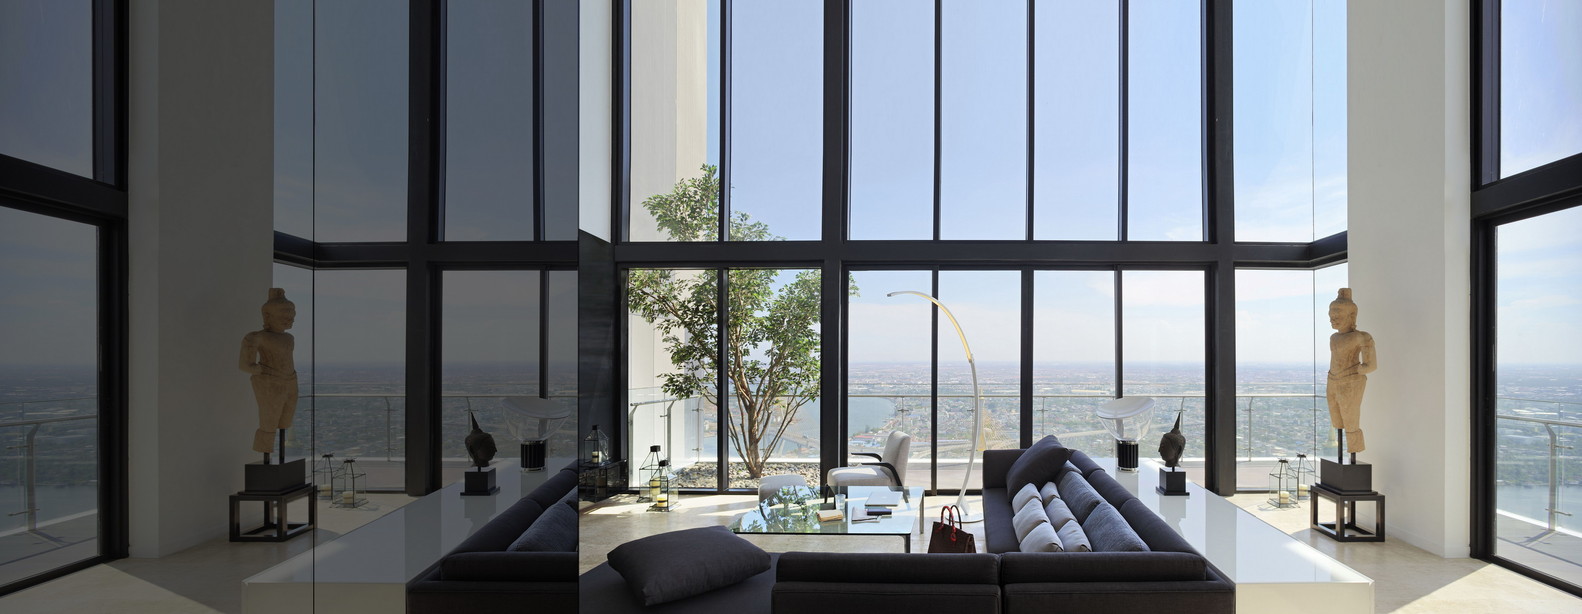 TOPDESIGN_Penthouse_Pano_09_L1_Living_room2